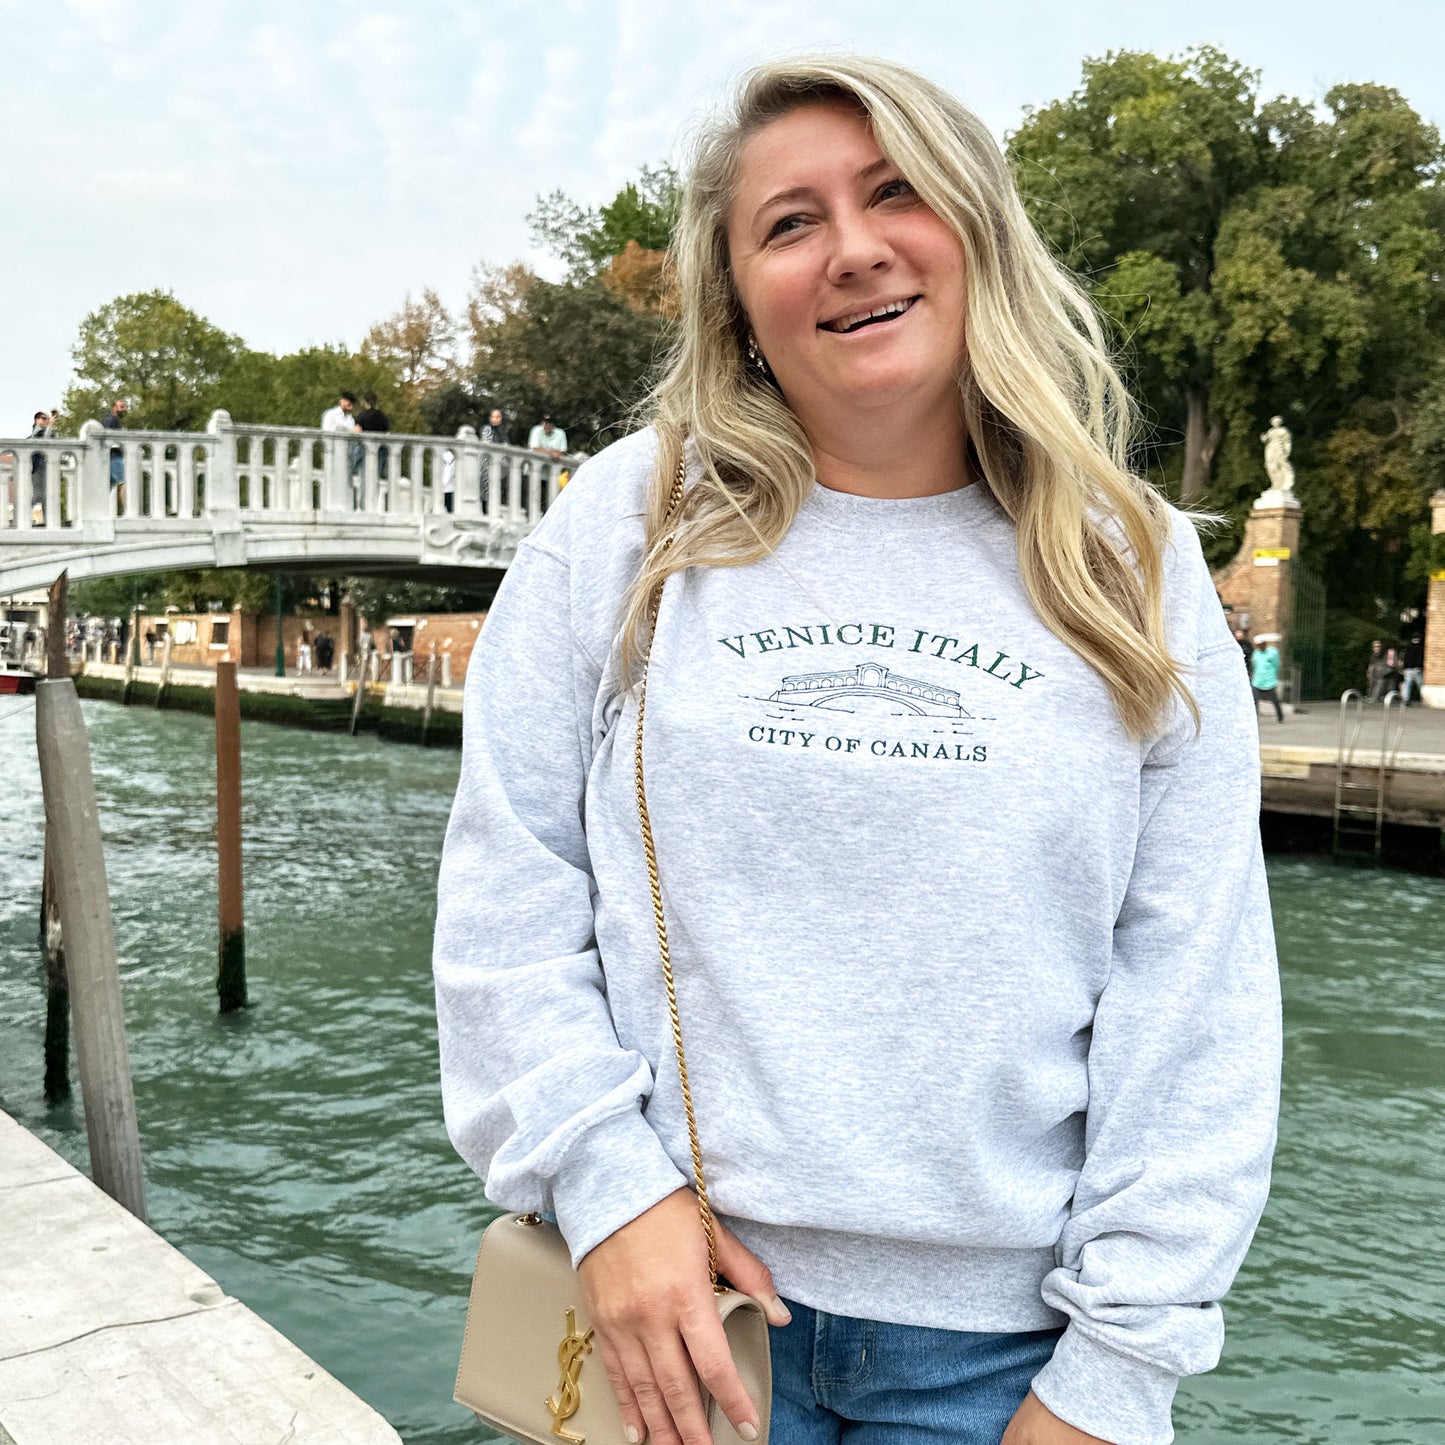 Woman styling an ash crewneck sweatshirt showcasing sketched venice bridge and venice italy city of canals text embroidered in ivy thread